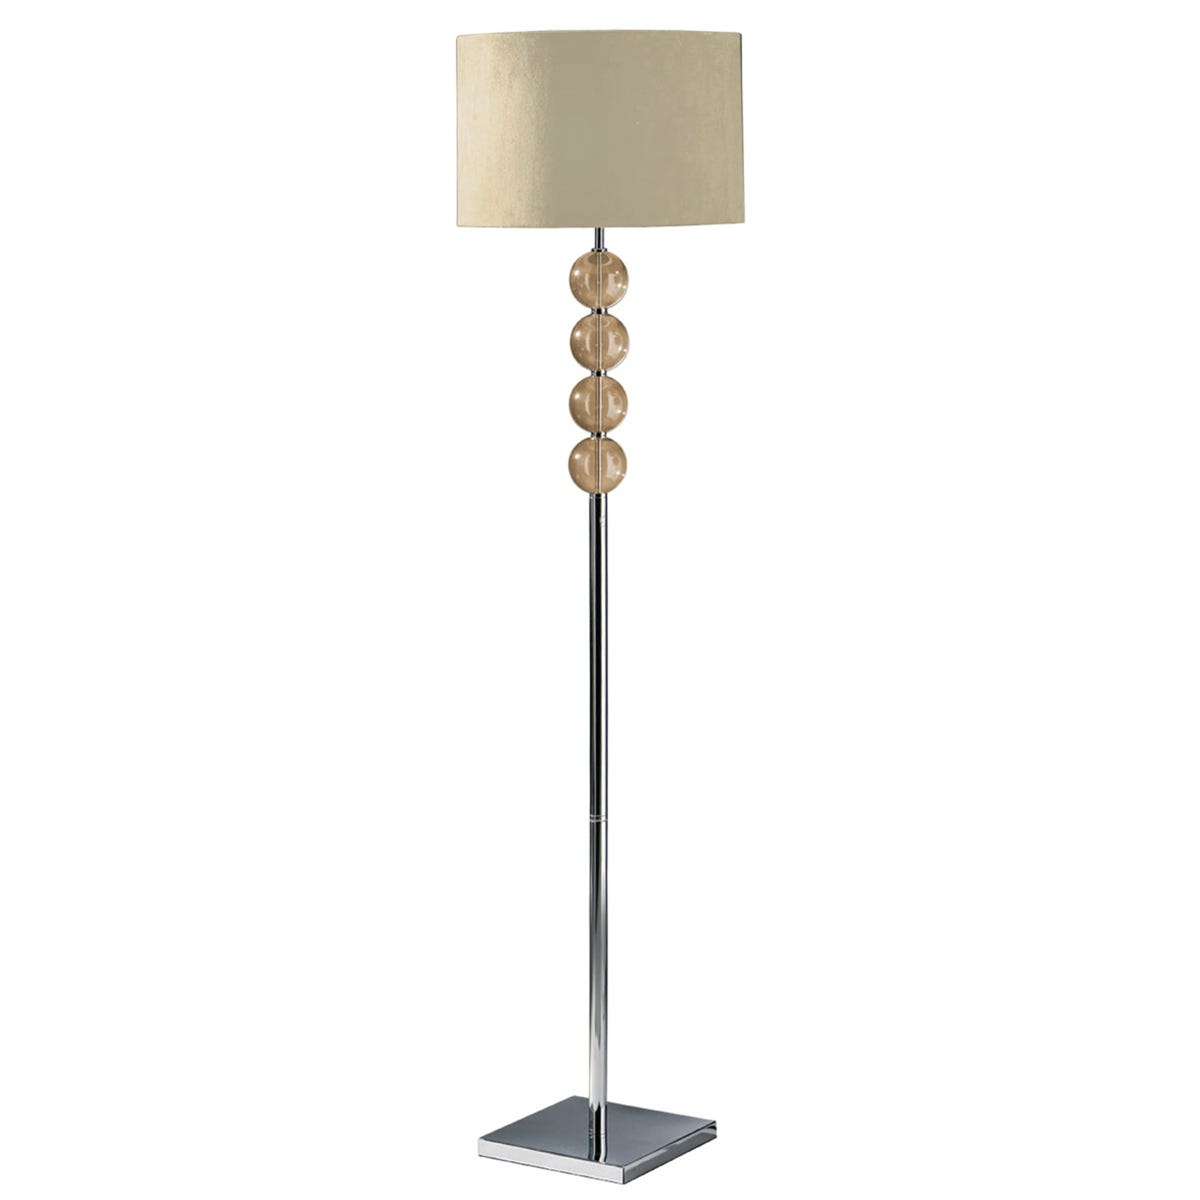 Premier Housewares Mistro Floor Lamp Amber Orb with Chrome Base & Cream Faux Suede Shade